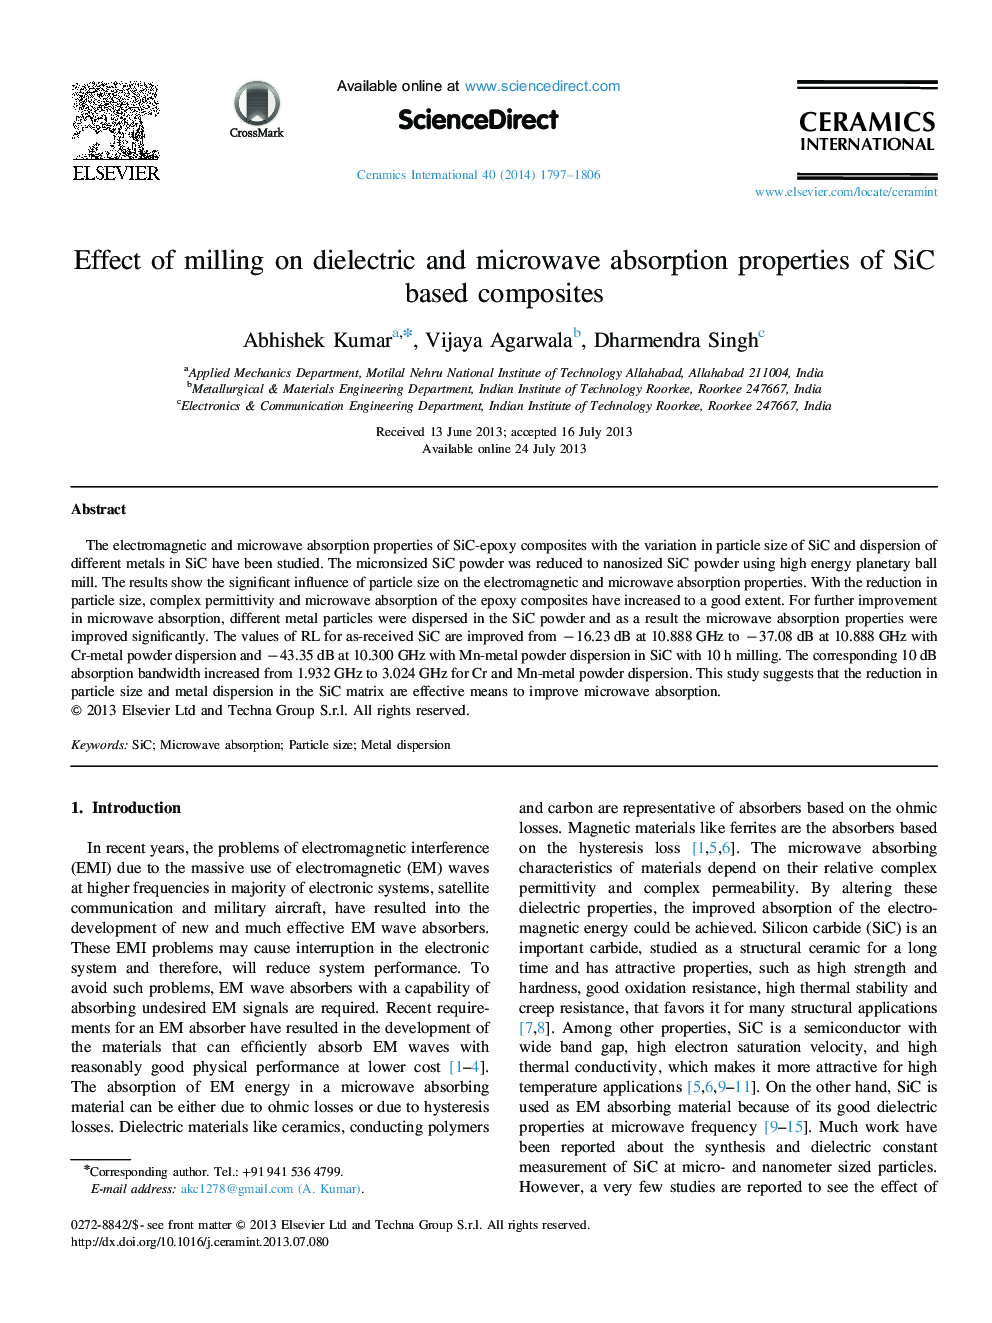 Effect of milling on dielectric and microwave absorption properties of SiC based composites